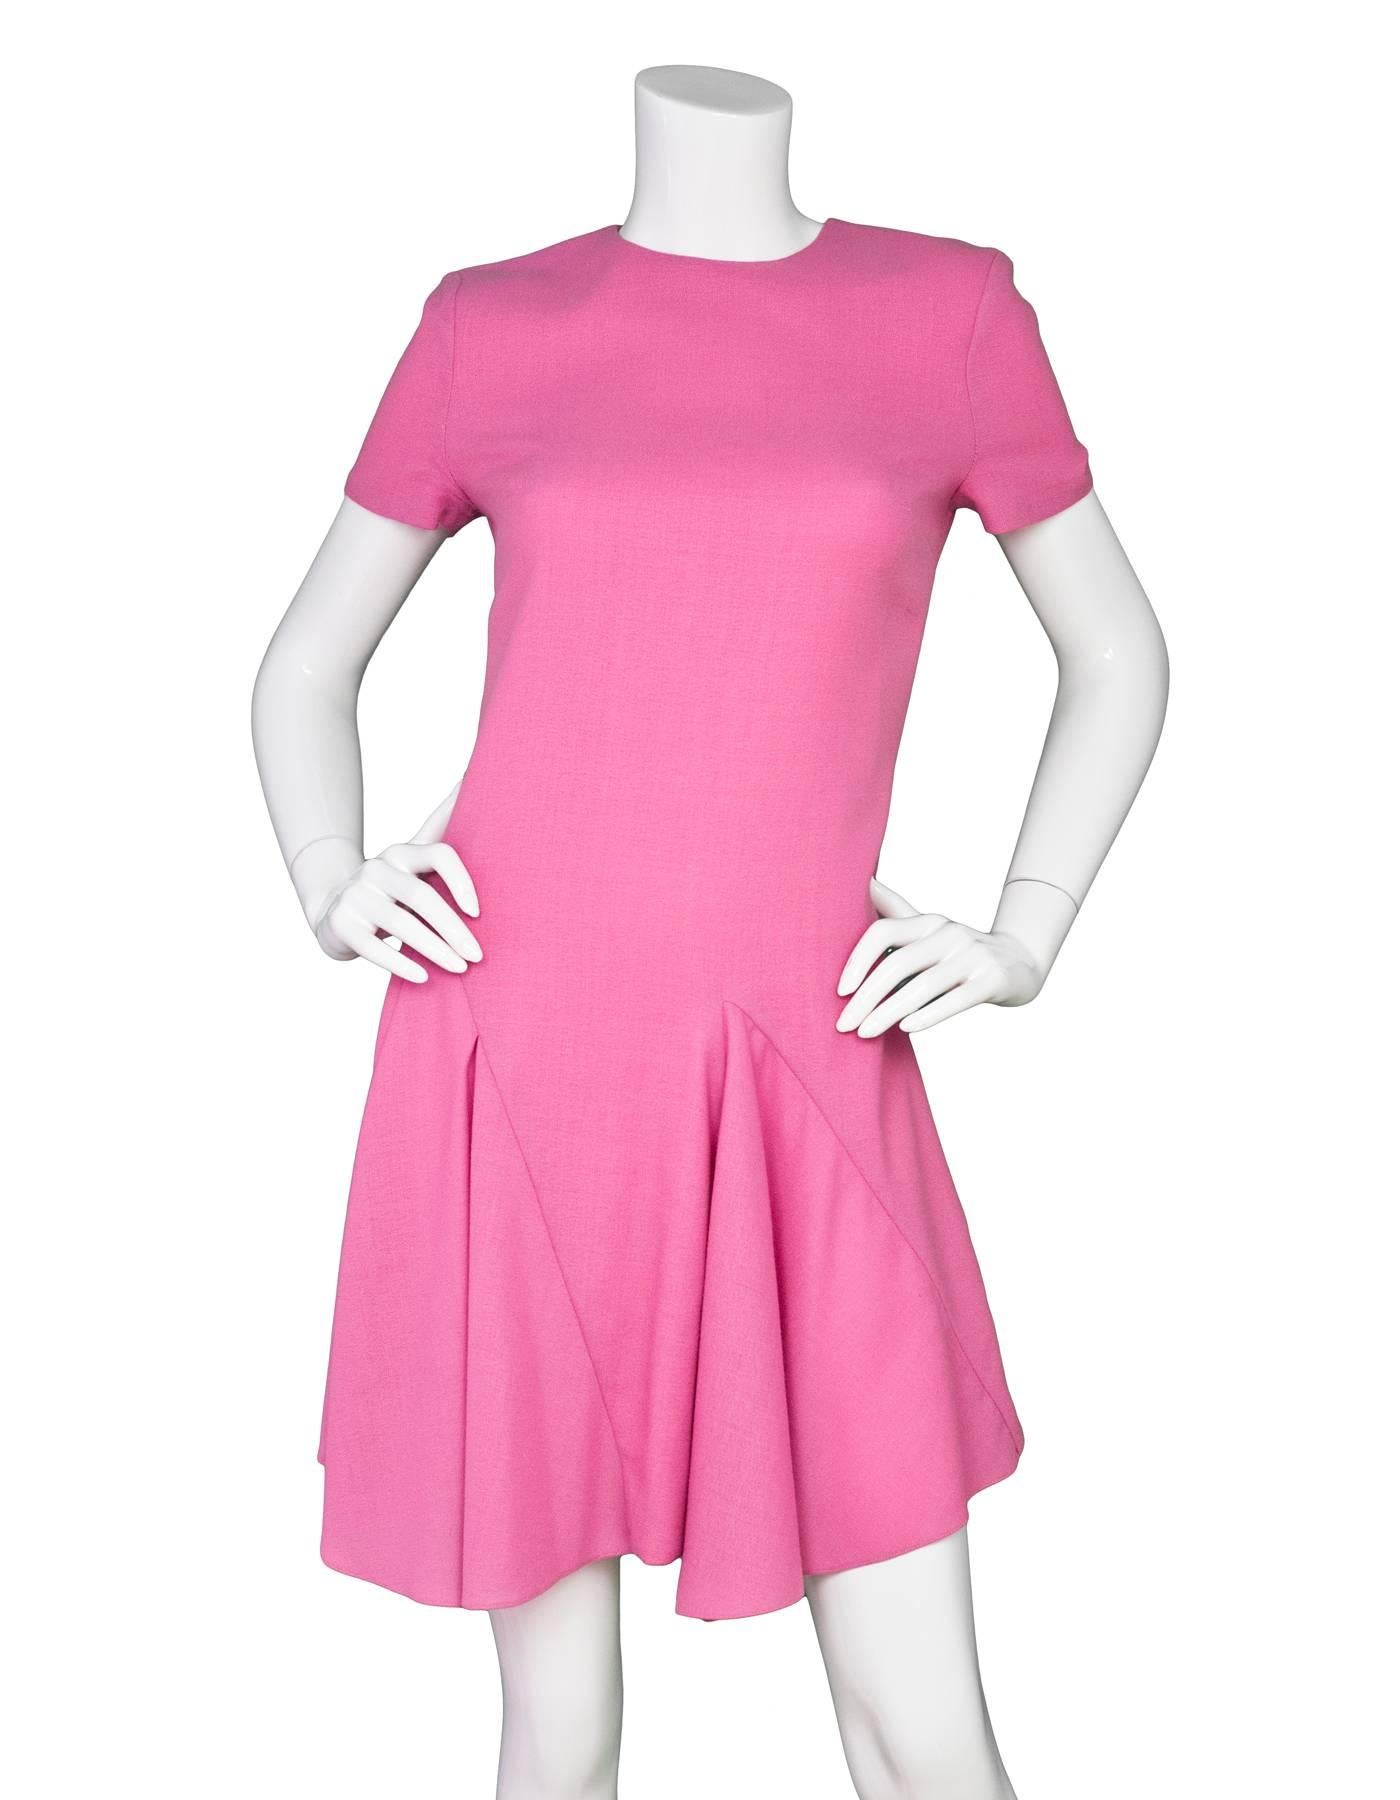 Christian Dior Pink Wool Dress Sz 6

Made In: France
Color: Pink
Composition: 100% Wool
Lining: Pink silk
Closure/Opening: Zip closure at back
Exterior Pockets: None
Interior Pockets: None
Overall Condition: Excellent pre-owned condition
Marked